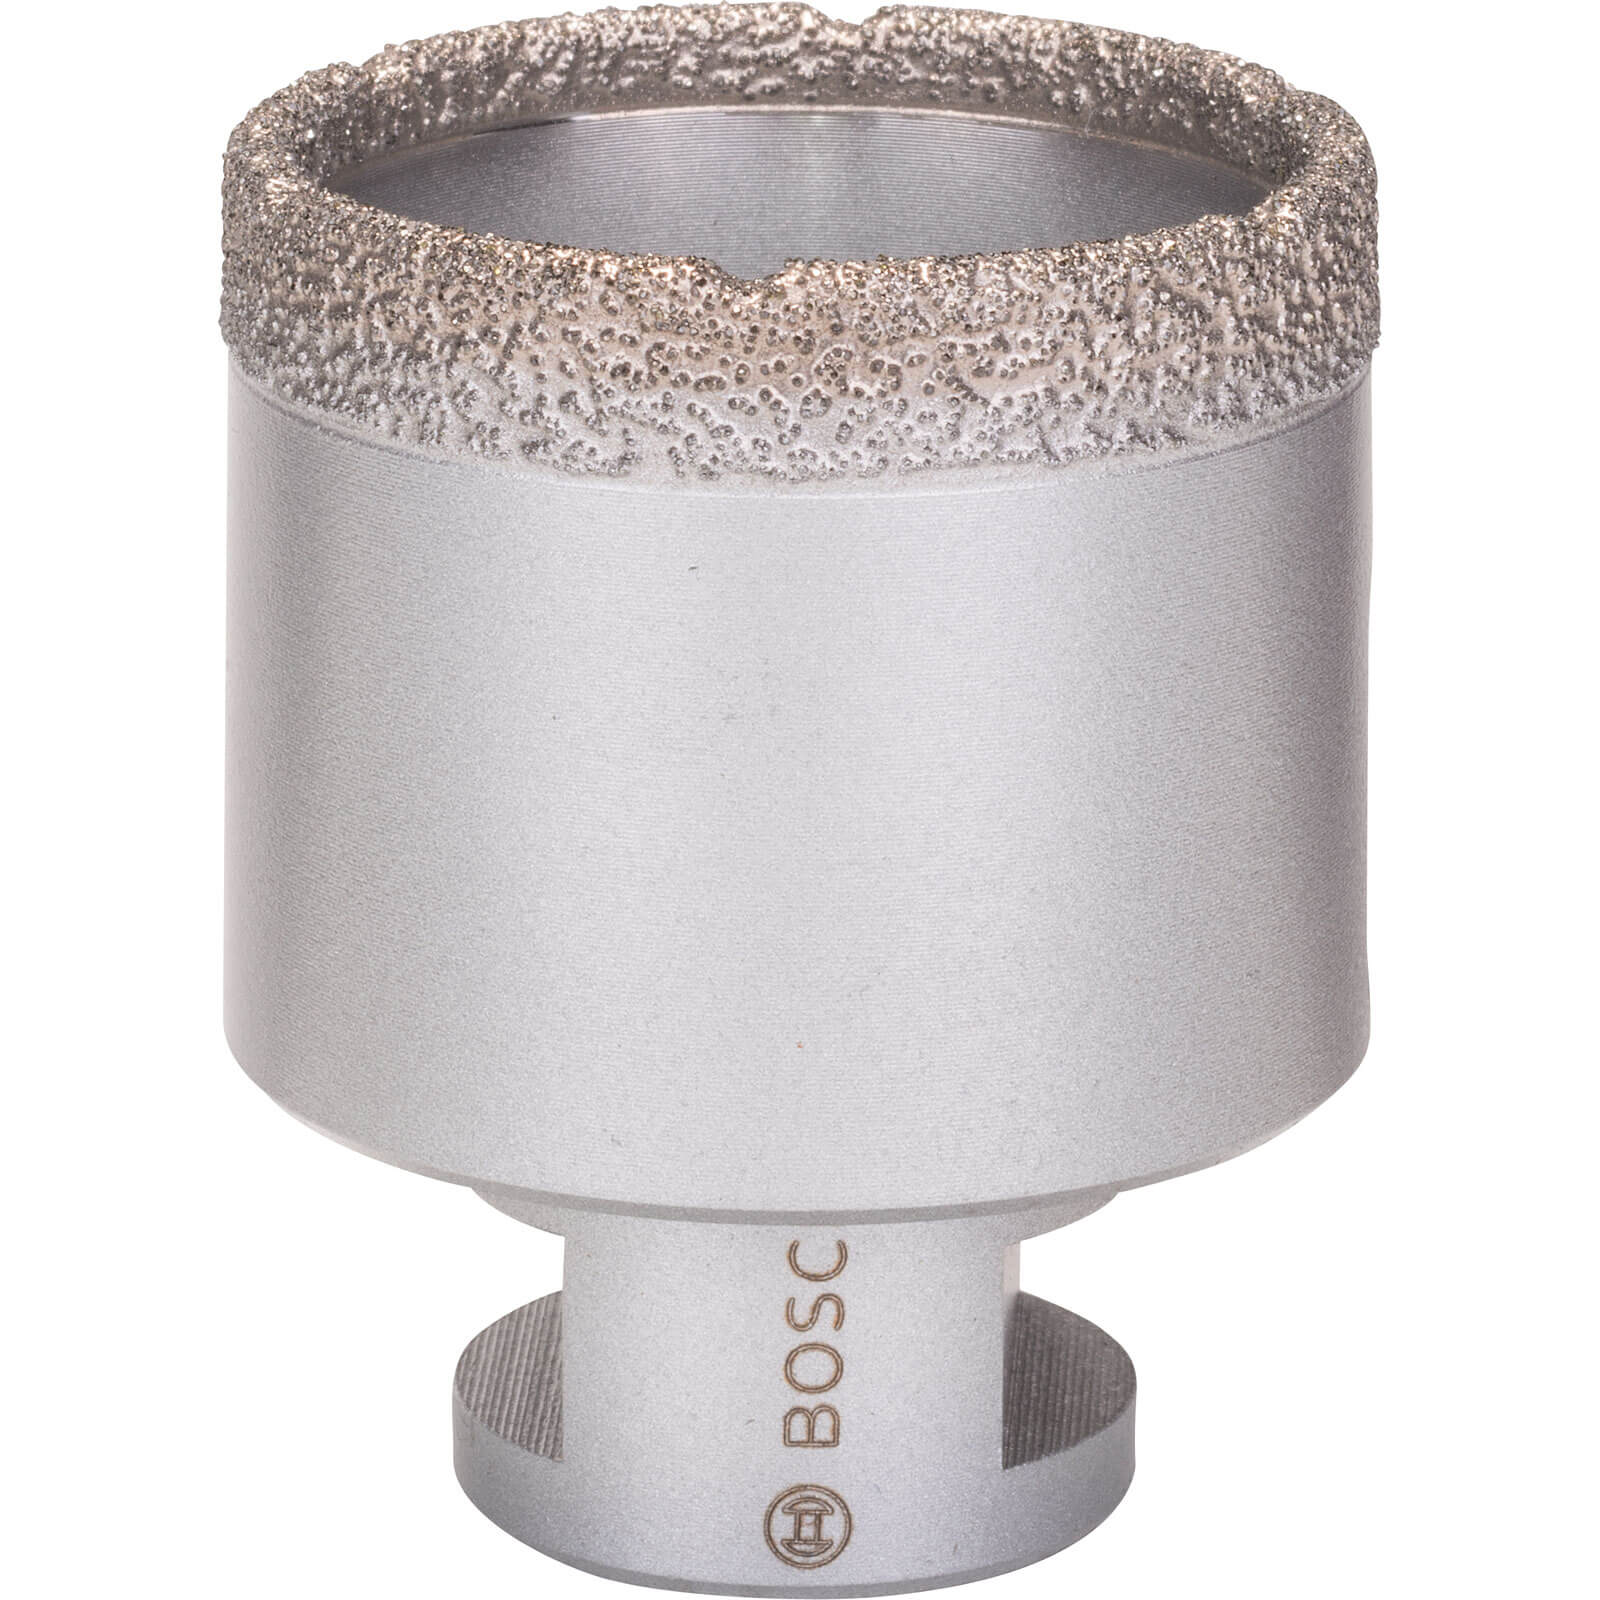 Image of Bosch Angle Grinder Dry Diamond Hole Cutter For Ceramics 51mm